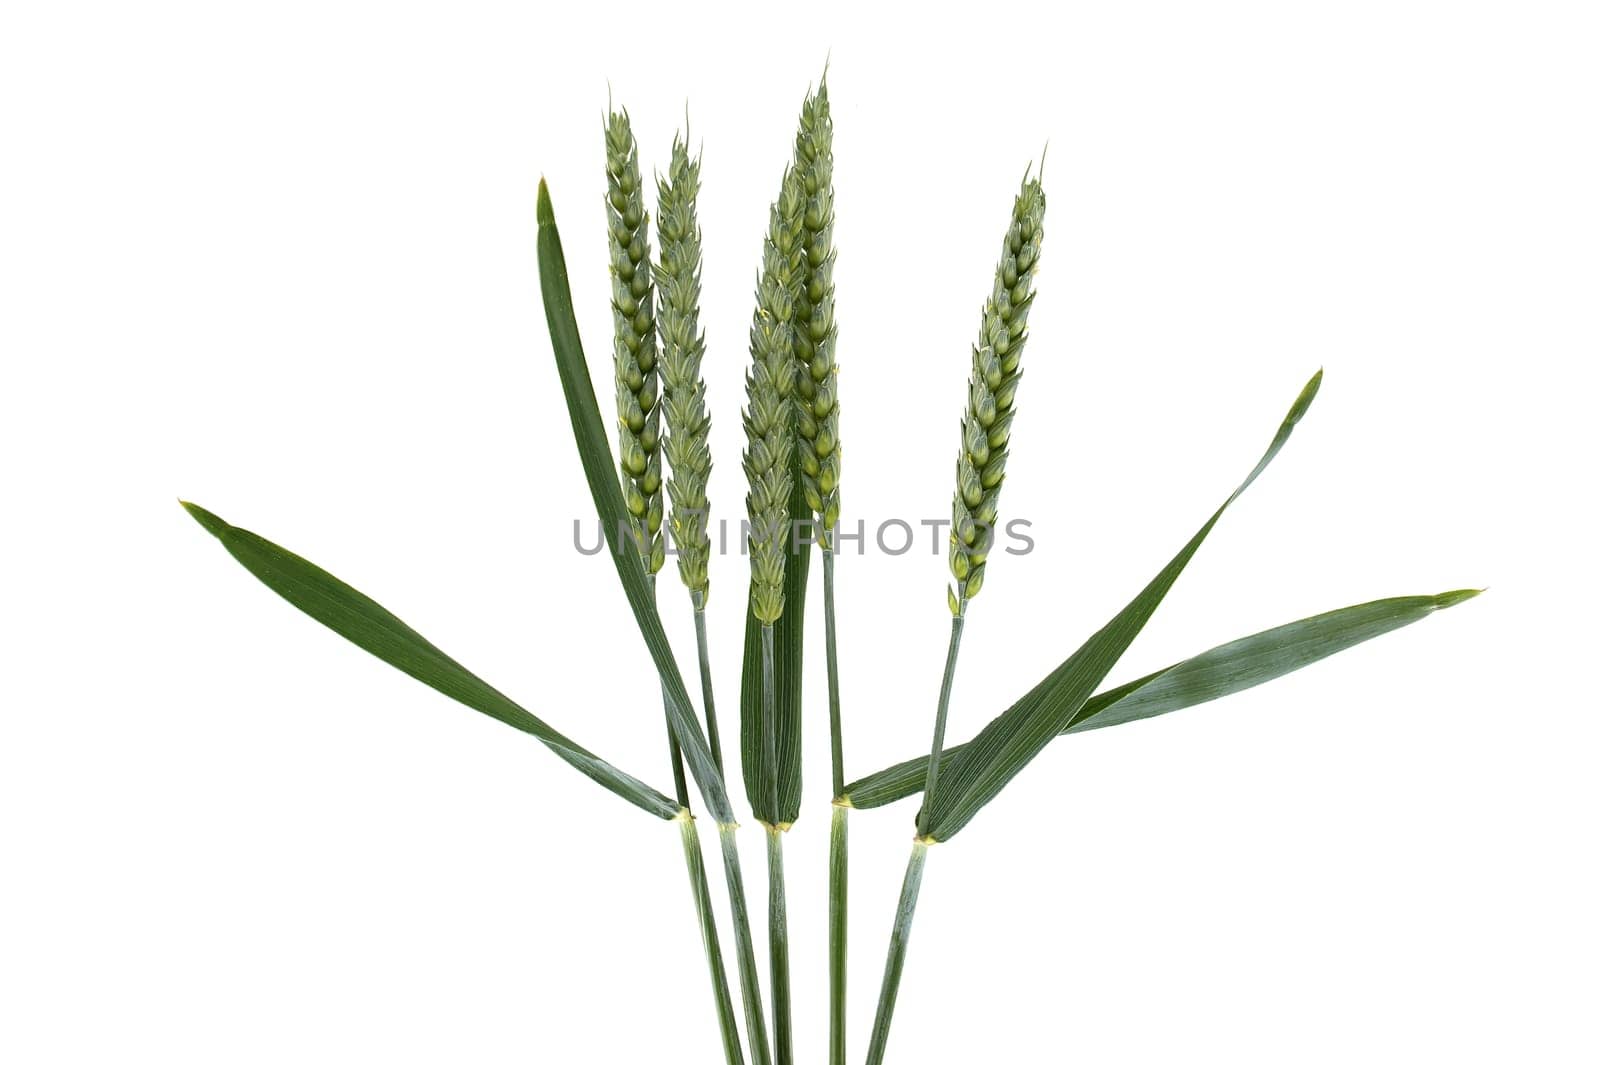 Close-up of green wheat stems against a white background with ample copy space. Ideal for agricultural, botanical, and nature themes